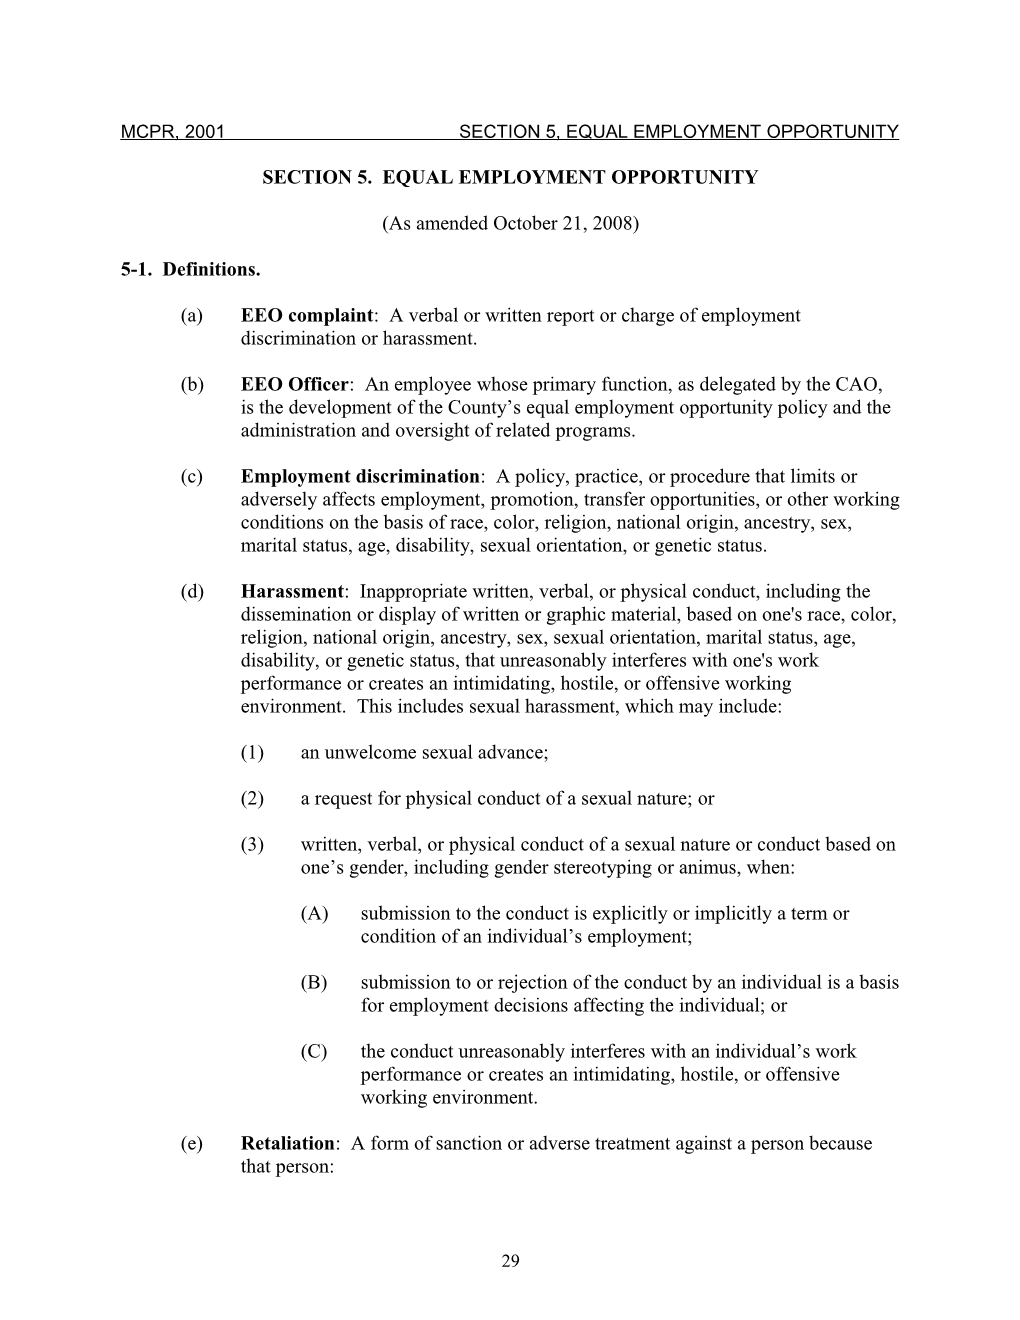 Section 5. Equal Employment Opportunity